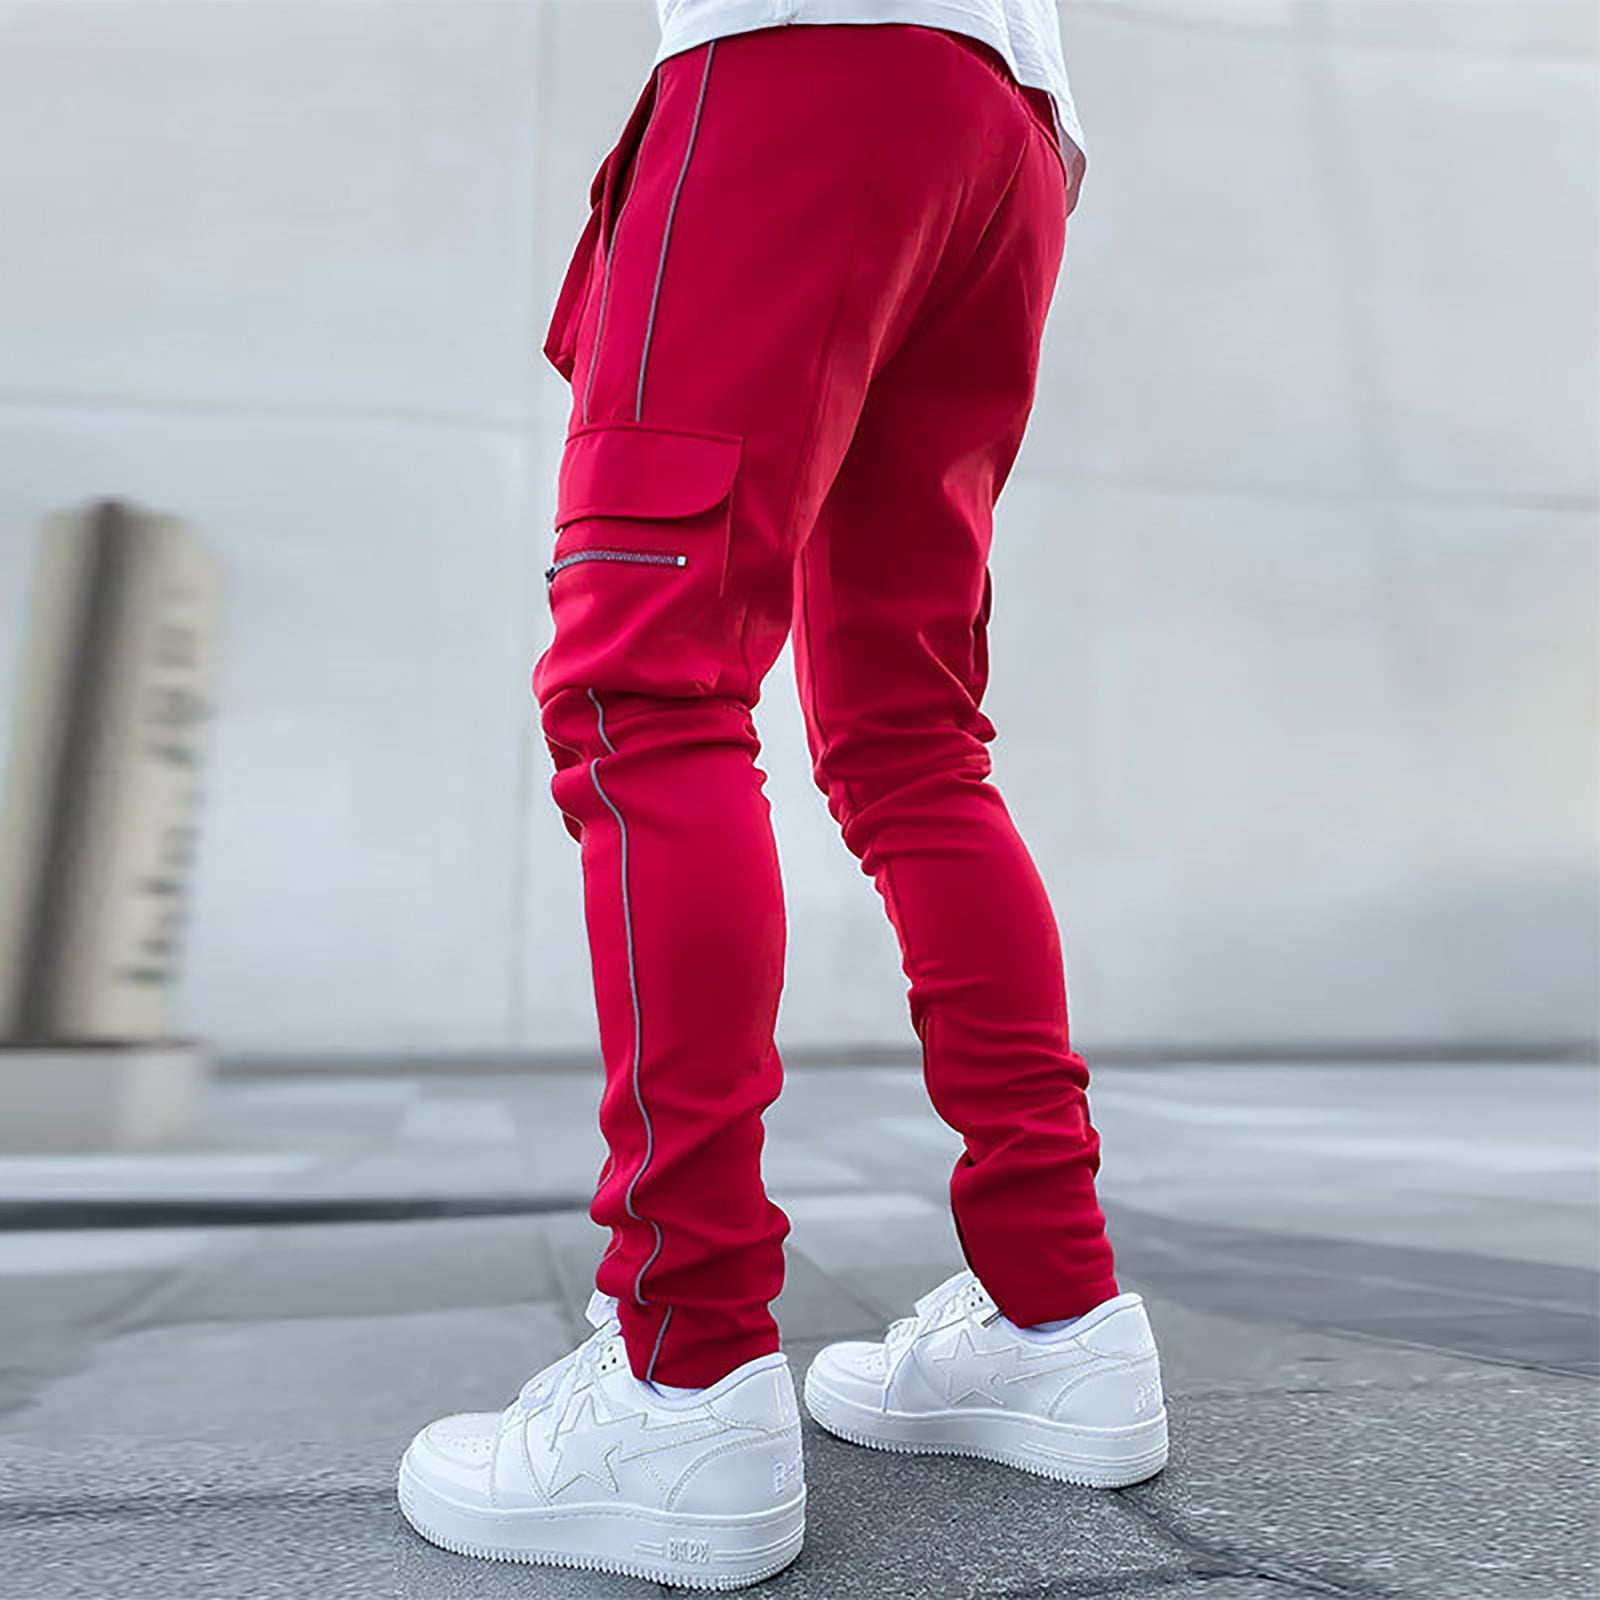 Liquor N Poker cargo pants in black and red with utility pockets | ASOS